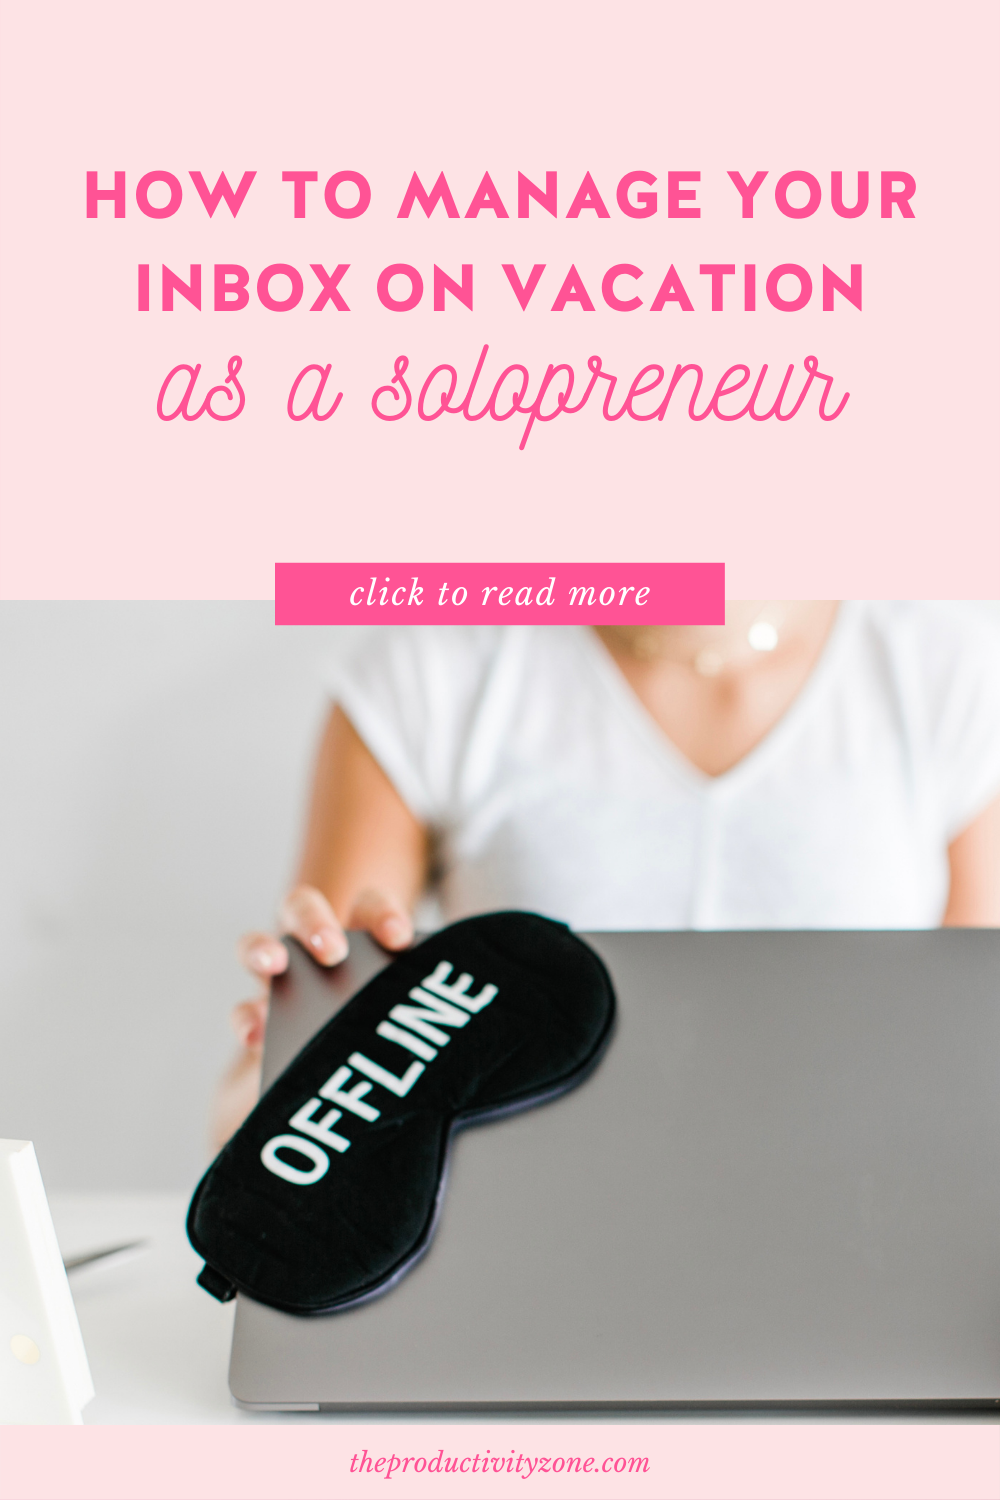 a blush pink background with hot pink text, a square photo of a laptop with a black eye mask with the word OFFLINE printed on it in white, and a hot pink read more banner